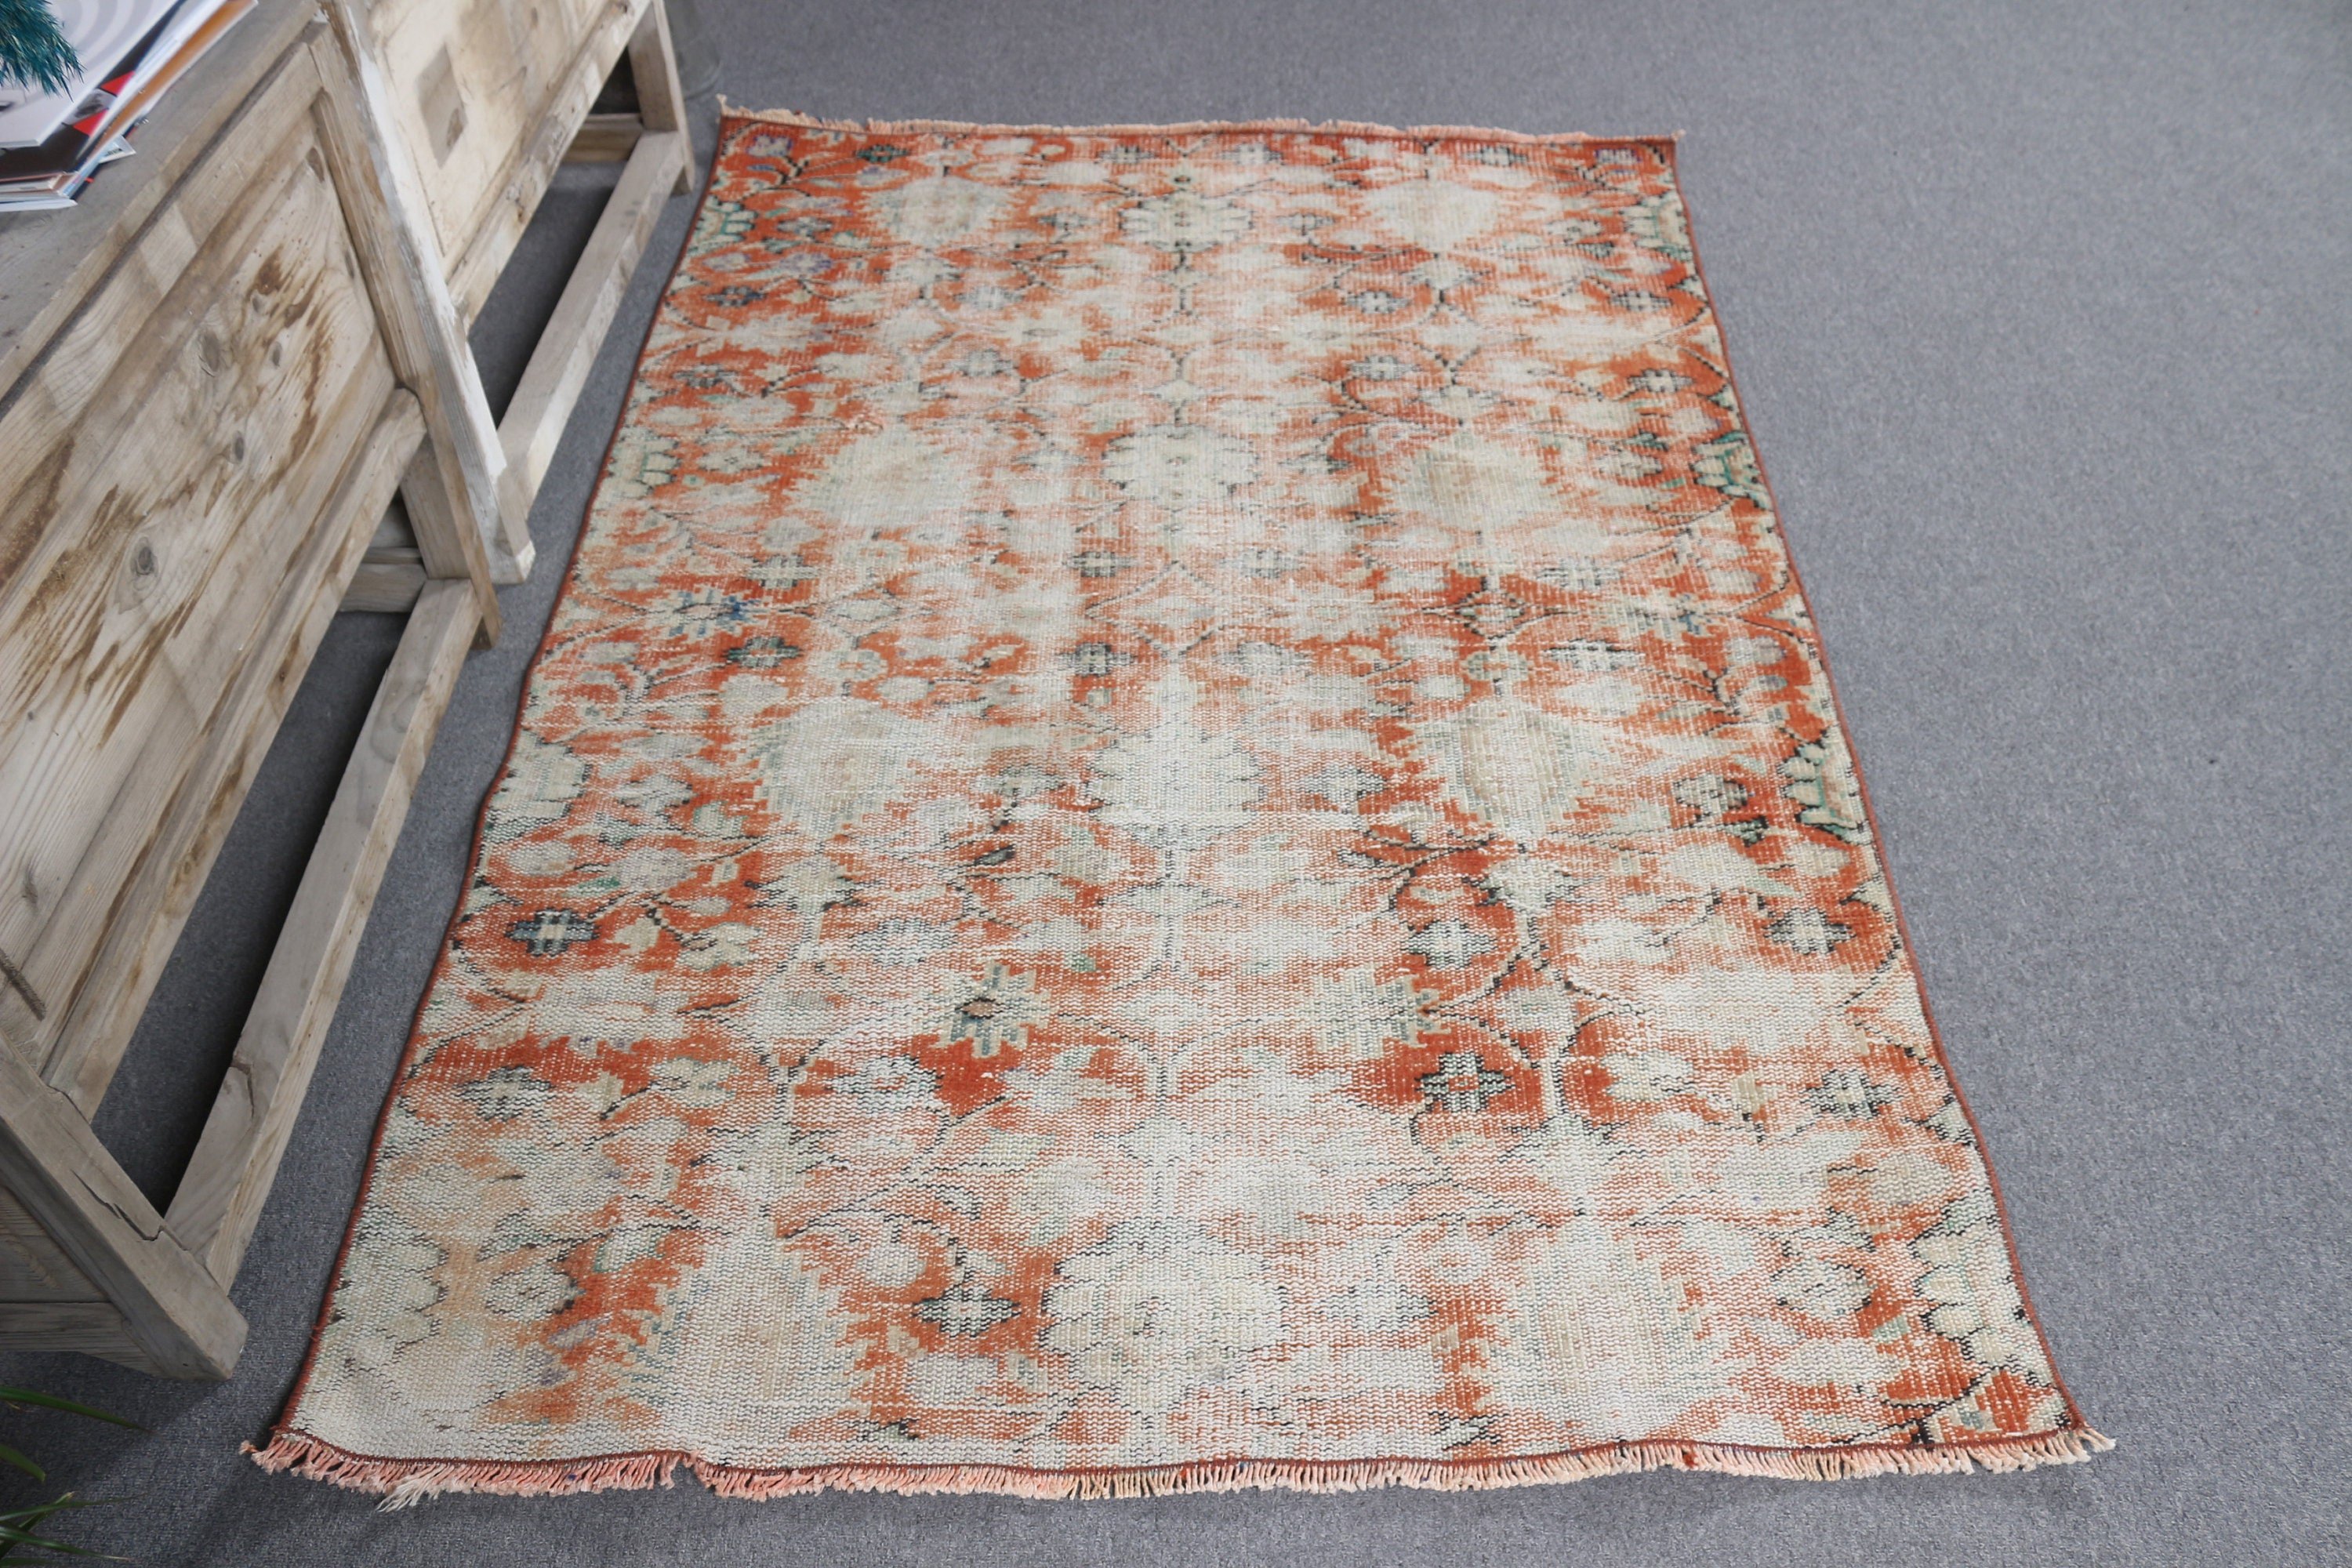 Entry Rug, Bedroom Rug, Rugs for Bedroom, 4x5.8 ft Accent Rug, Moroccan Rugs, Turkish Rug, Wool Rug, Red Home Decor Rugs, Vintage Rugs